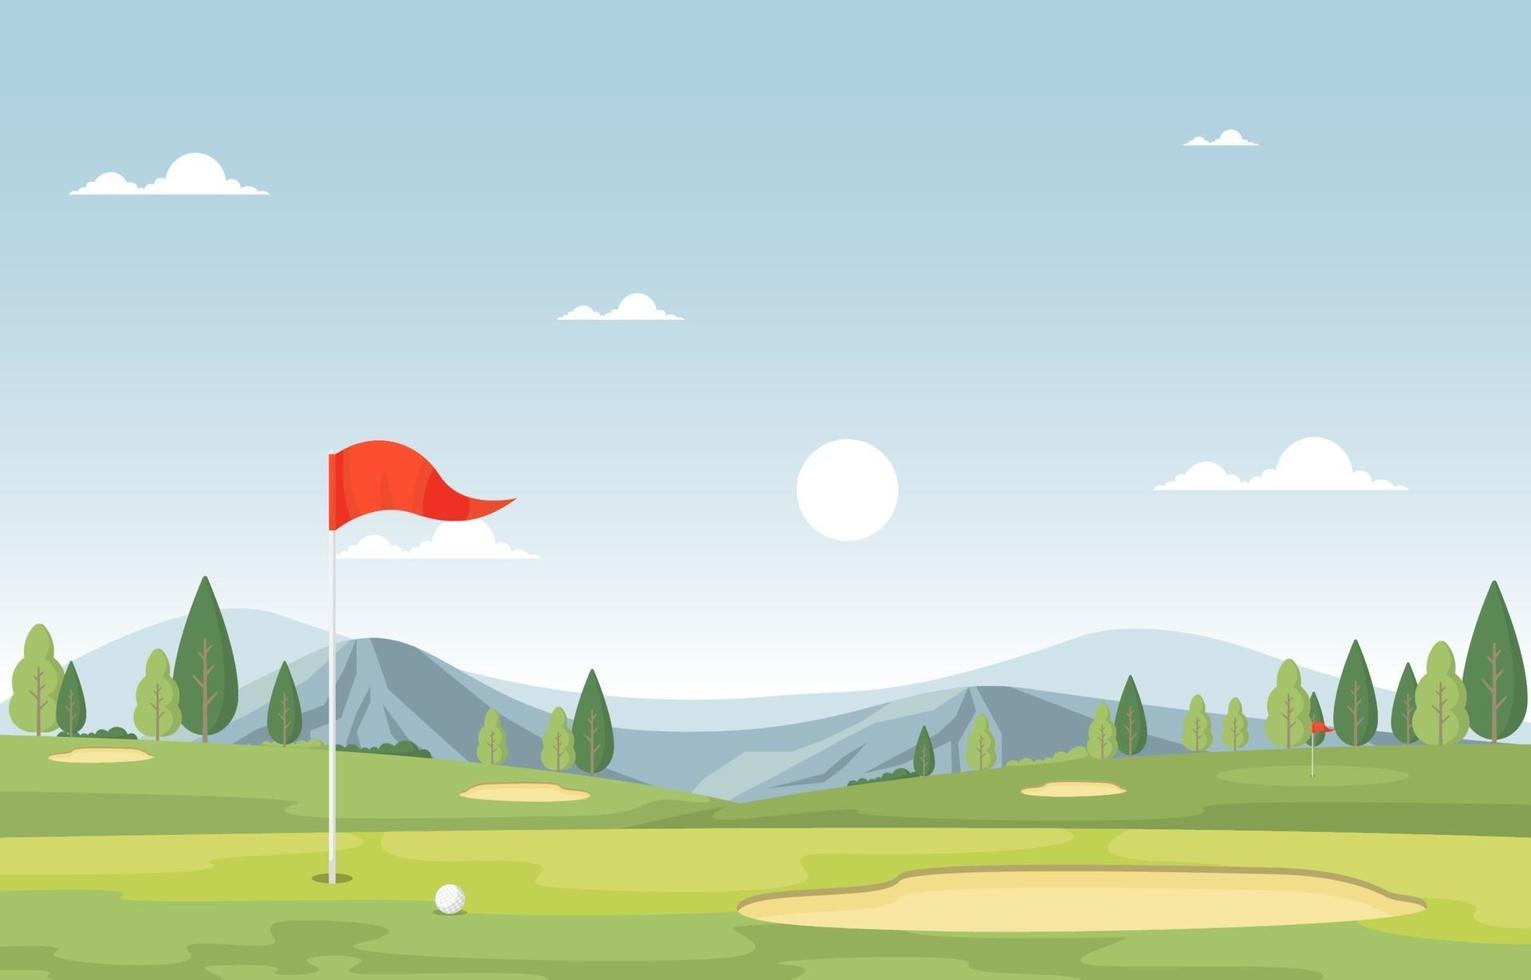 Golf Course with Red Flag, Trees, and Mountains vector